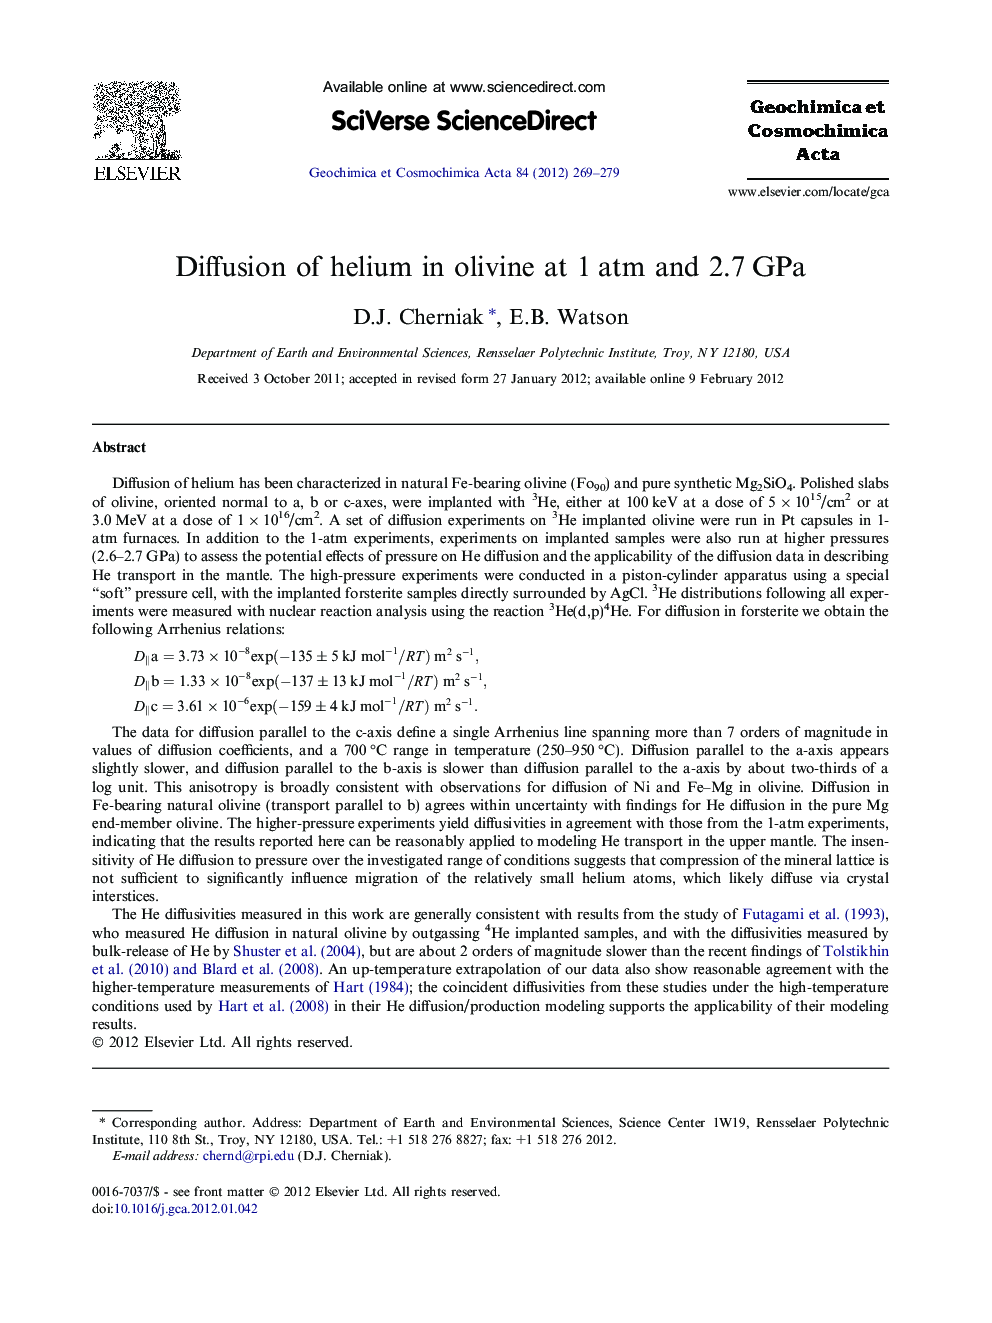 Diffusion of helium in olivine at 1 atm and 2.7 GPa